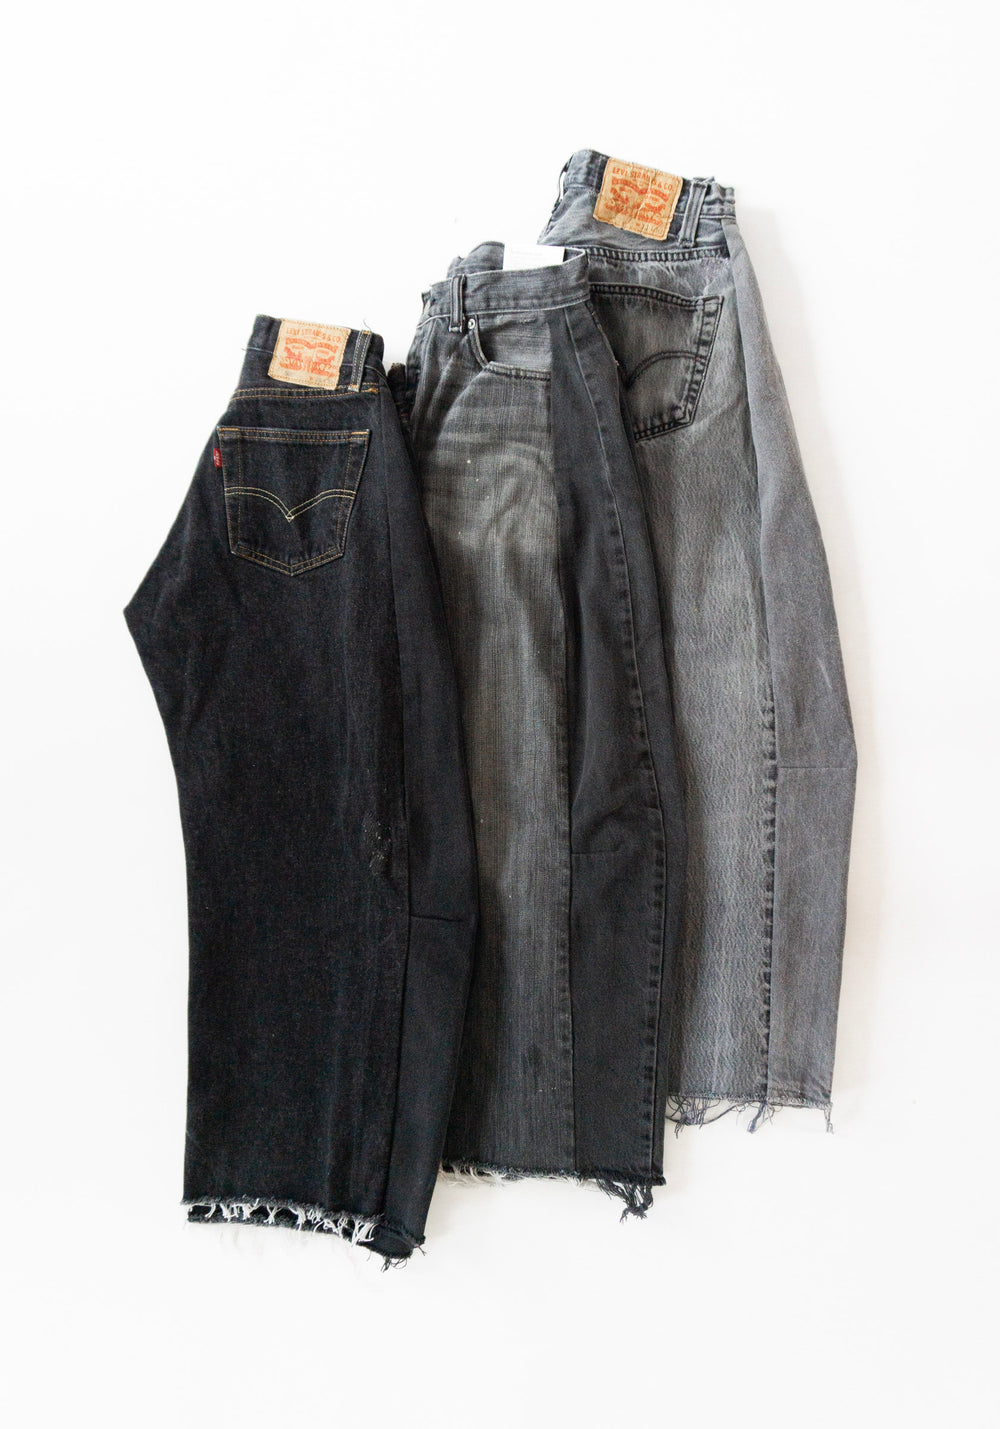 B Sides Vintage Lasso Upcycled Relaxed Fit Jeans – Halo Shoes